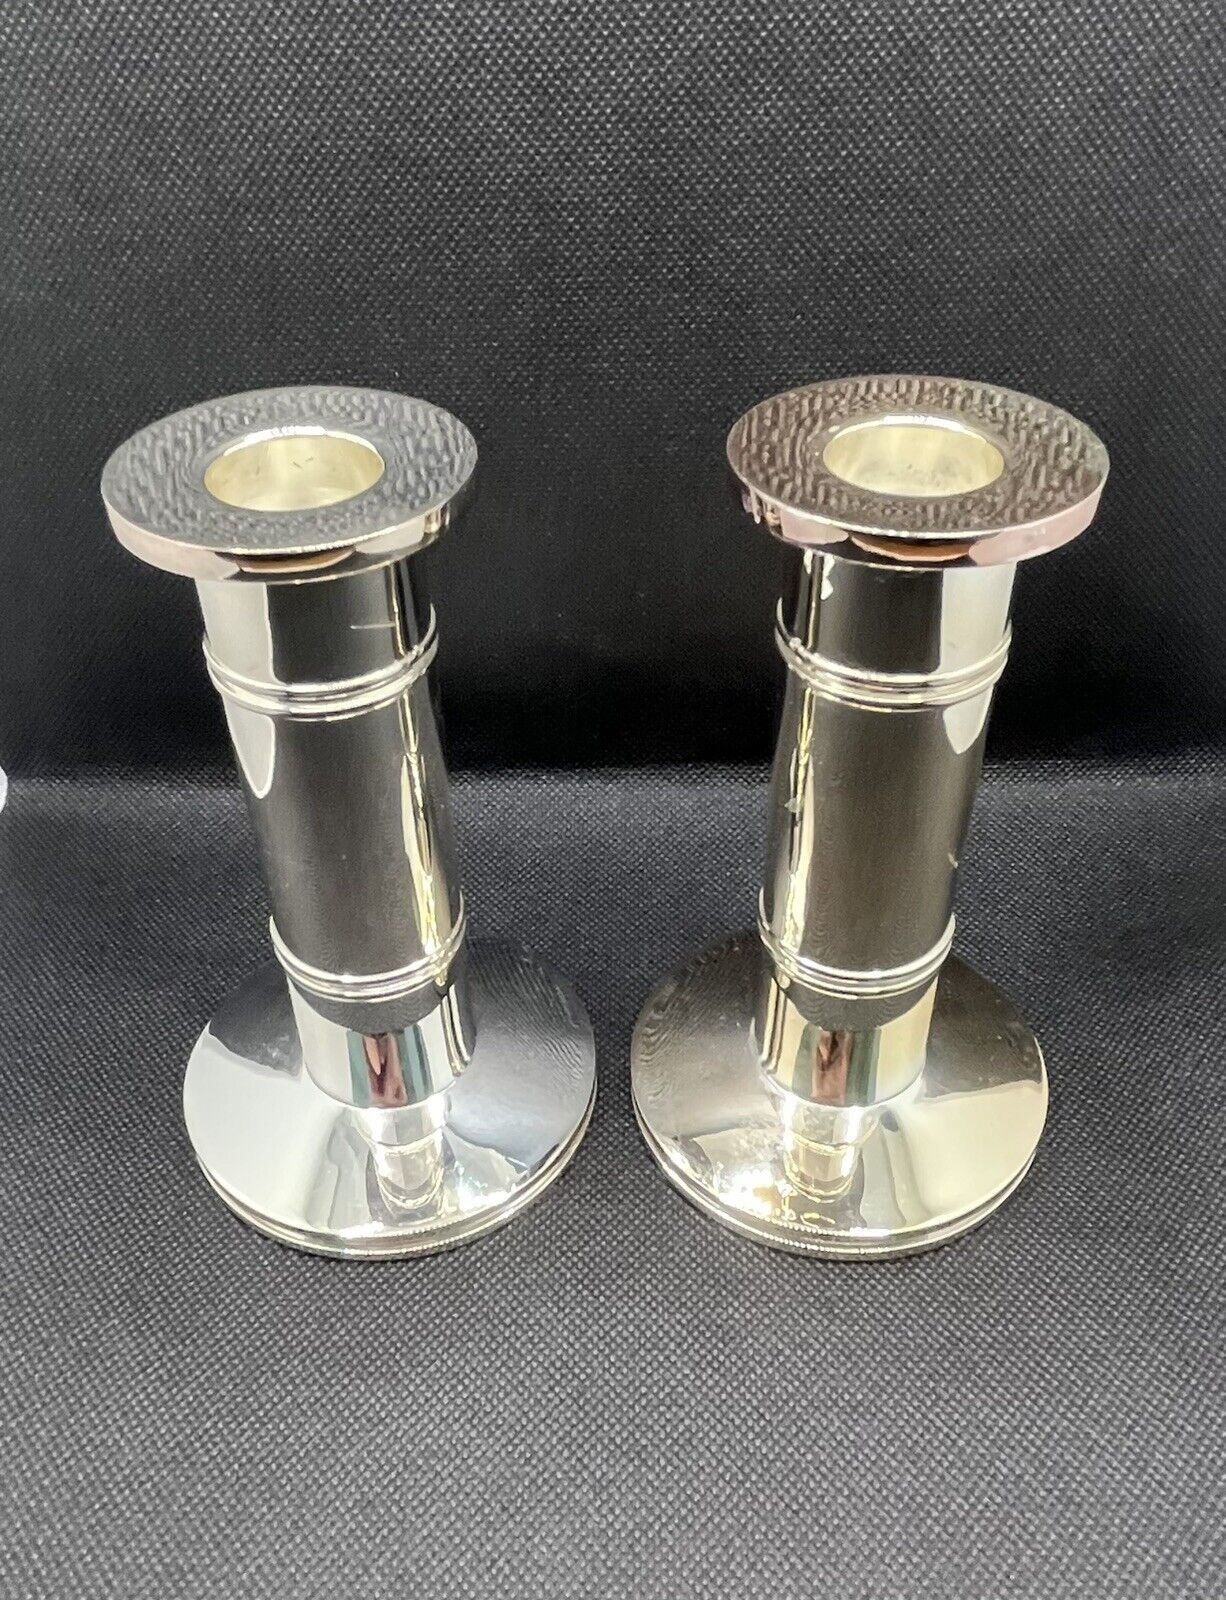 Kate Spade NY Lenox Silver Plated Candlesticks Pillar Candle Holders Pair Of 2